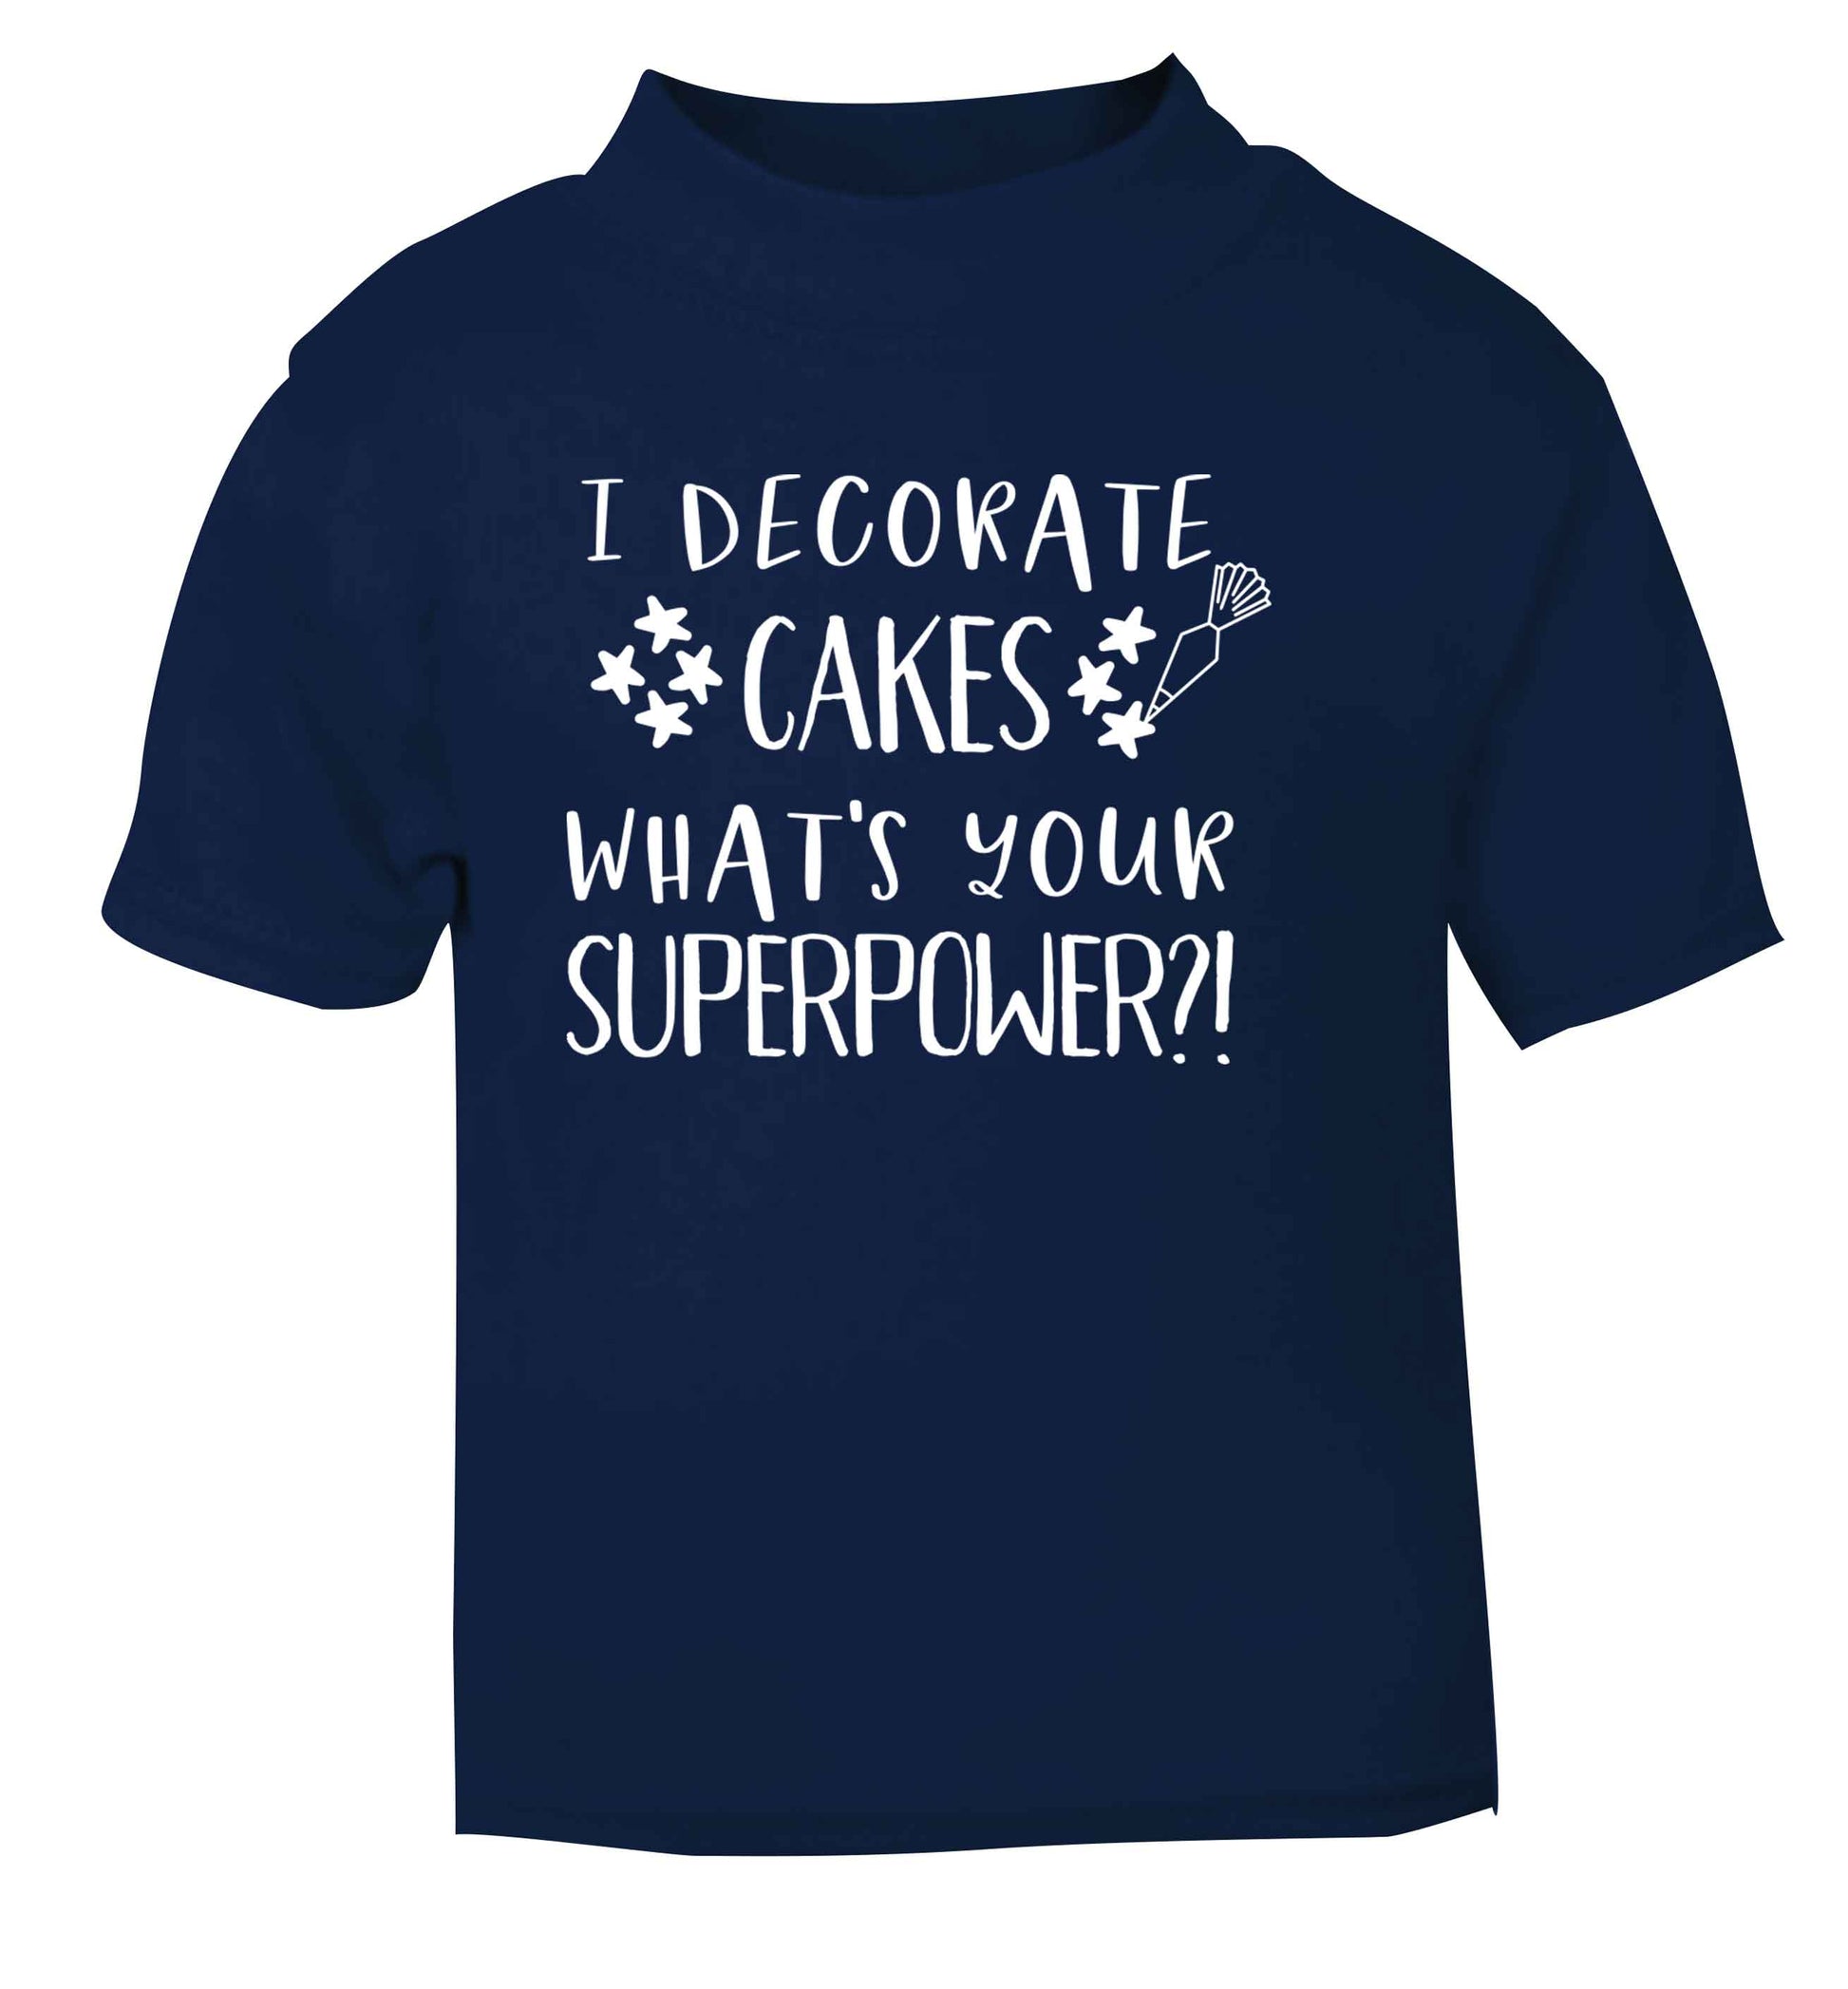 I decorate cakes what's your superpower?! navy Baby Toddler Tshirt 2 Years